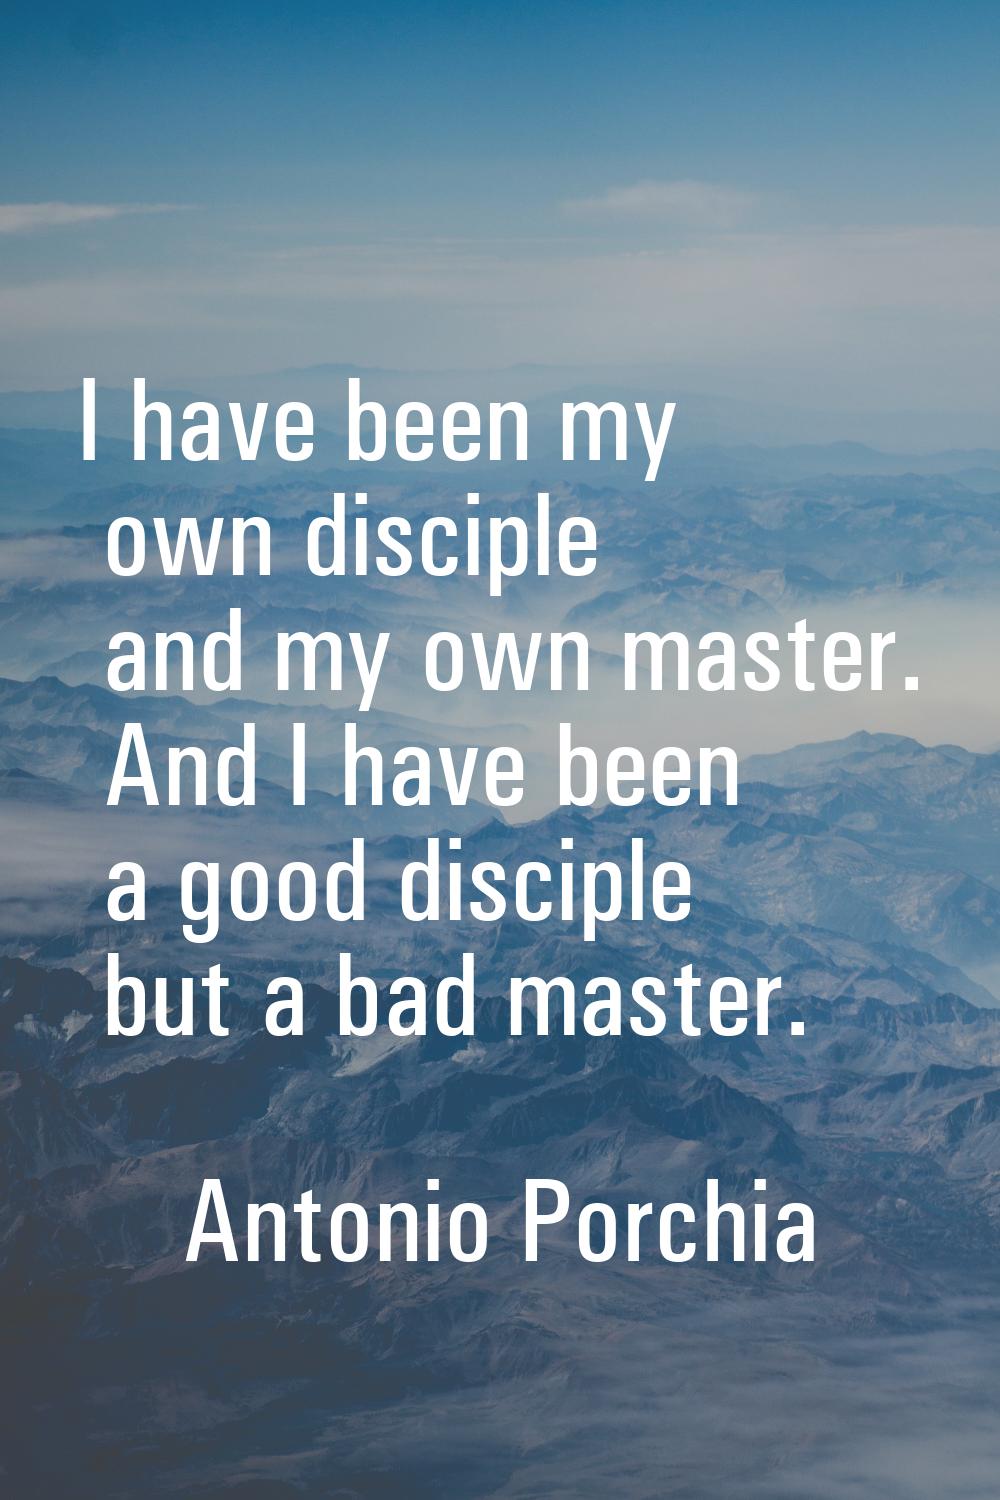 I have been my own disciple and my own master. And I have been a good disciple but a bad master.